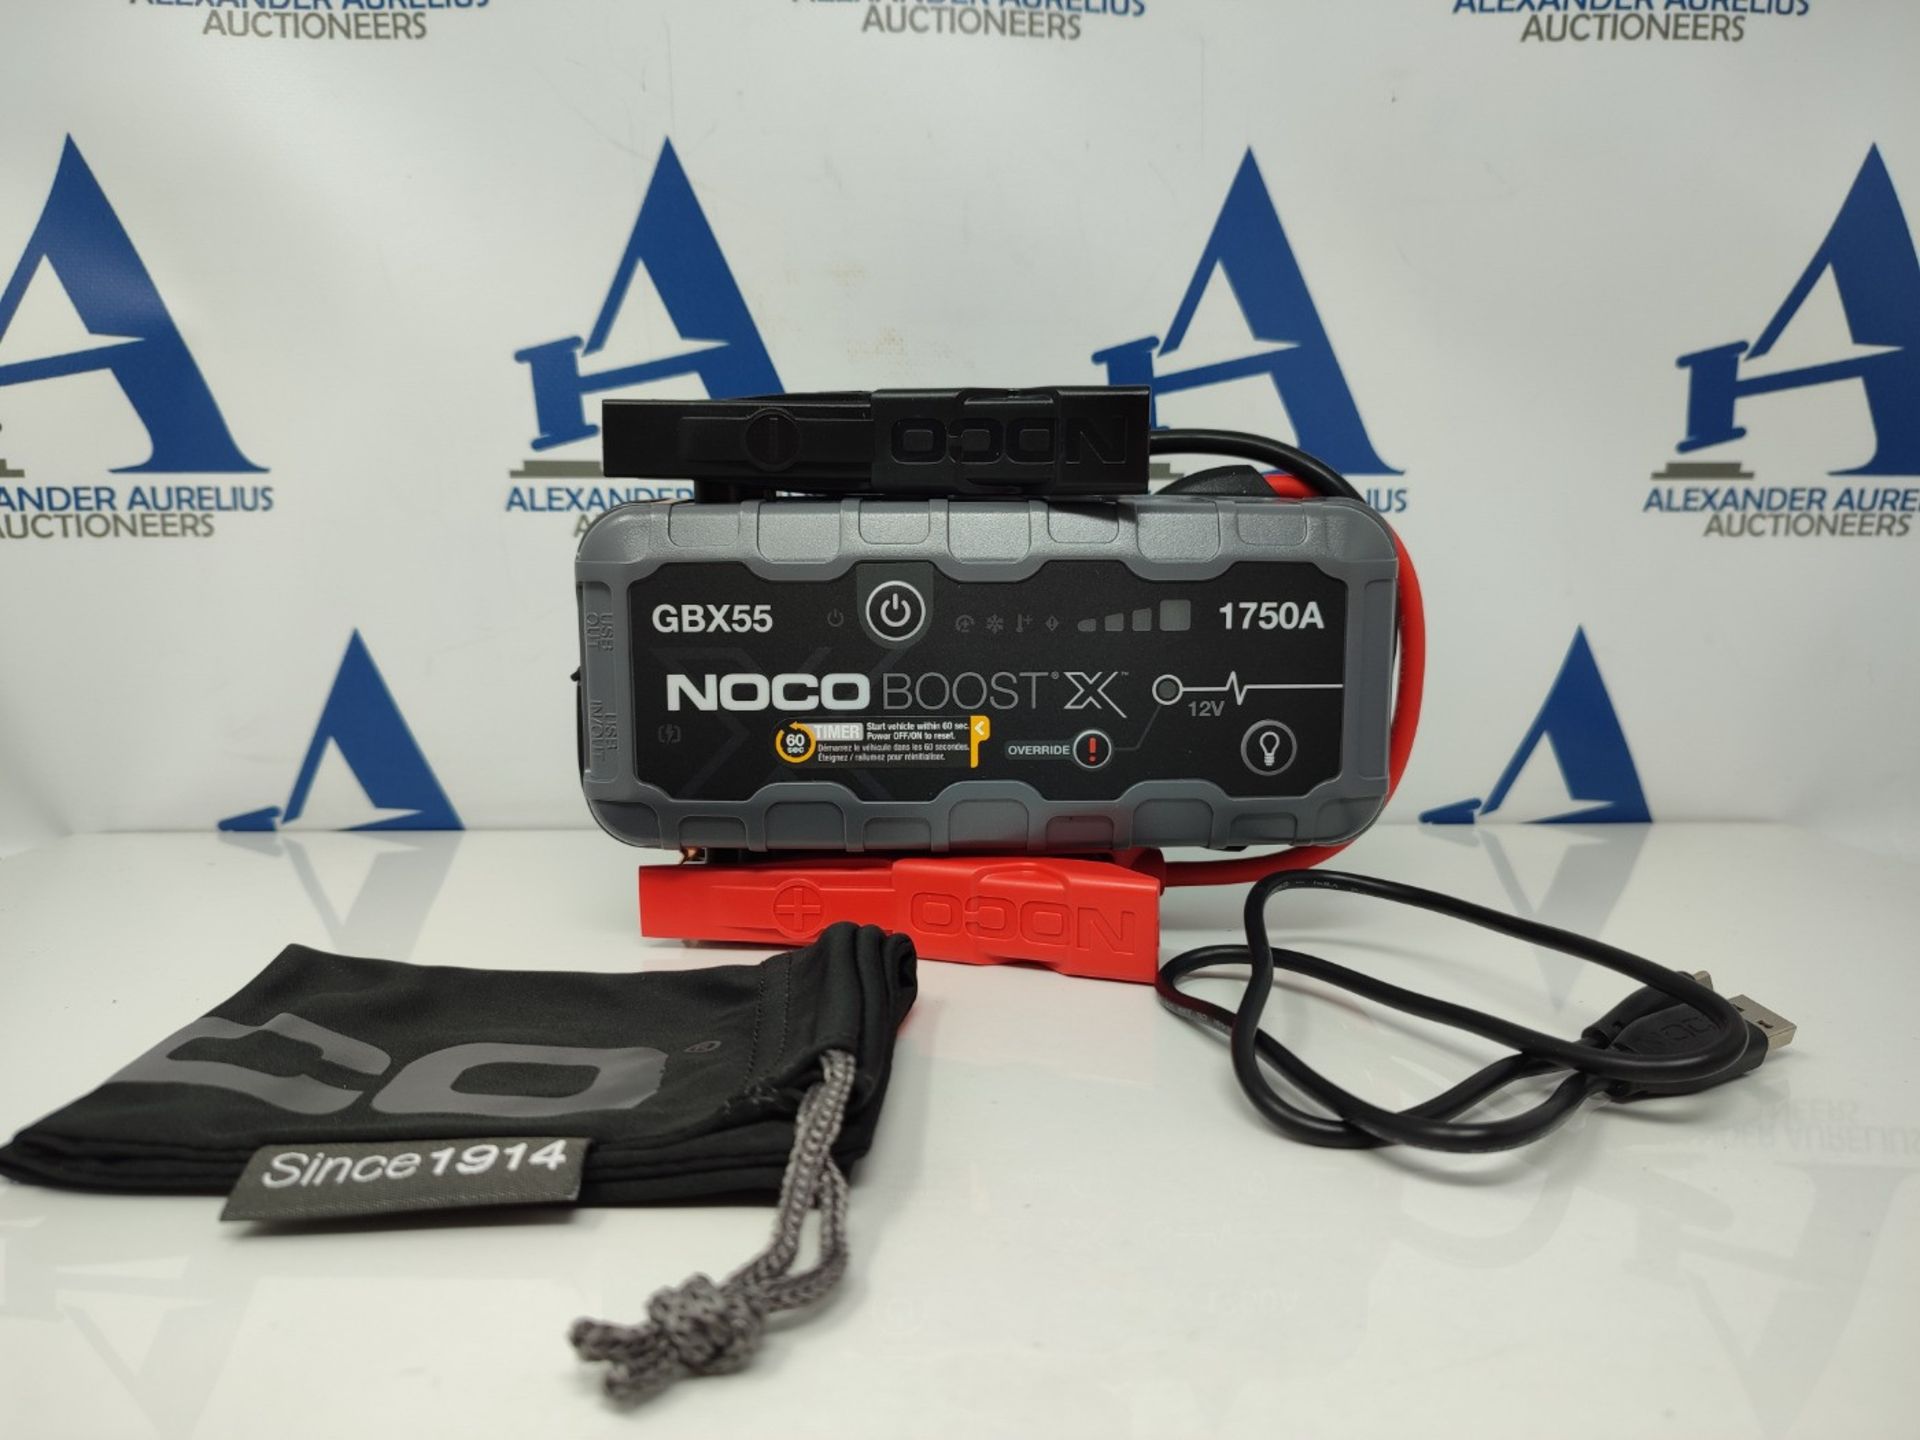 RRP £184.00 NOCO Boost X GBX55 12V UltraSafe Portable Lithium Car Jump Starter, Heavy-Duty Battery - Image 2 of 10